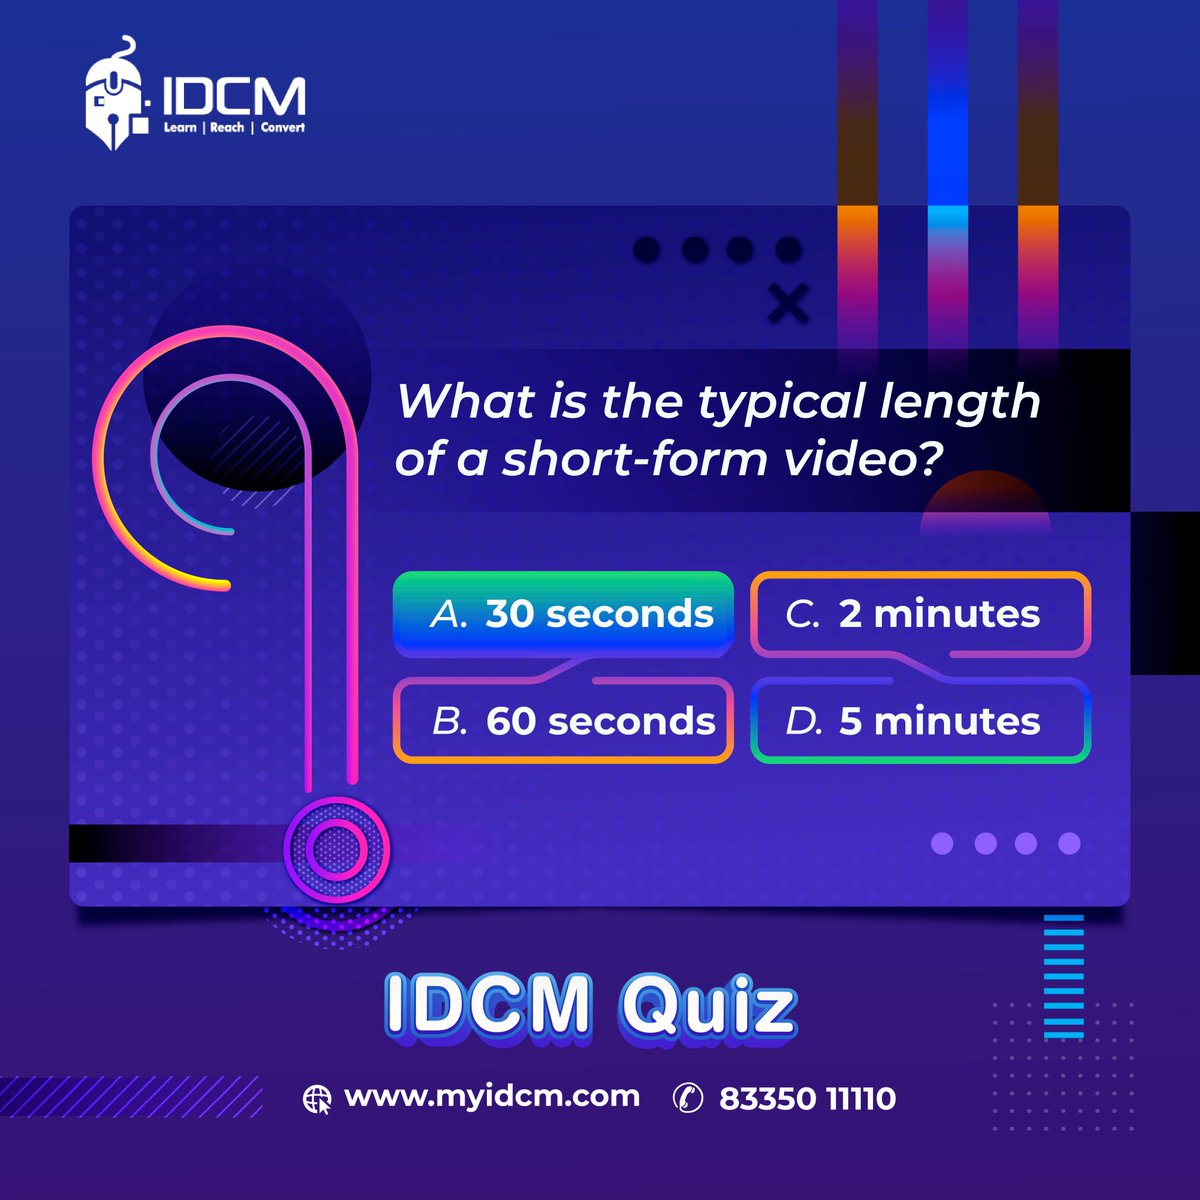 Are you a marketing pro or an aspiring marketer? Test your expertise with our quiz!
Comment your answers below 

#myIDCM #LearnWithIDCM #DigitalMarketing #IAmDigitalReady #WinningStrokewithIDCM #DigitalLearningHub #quizzes #tips #shortvideonew